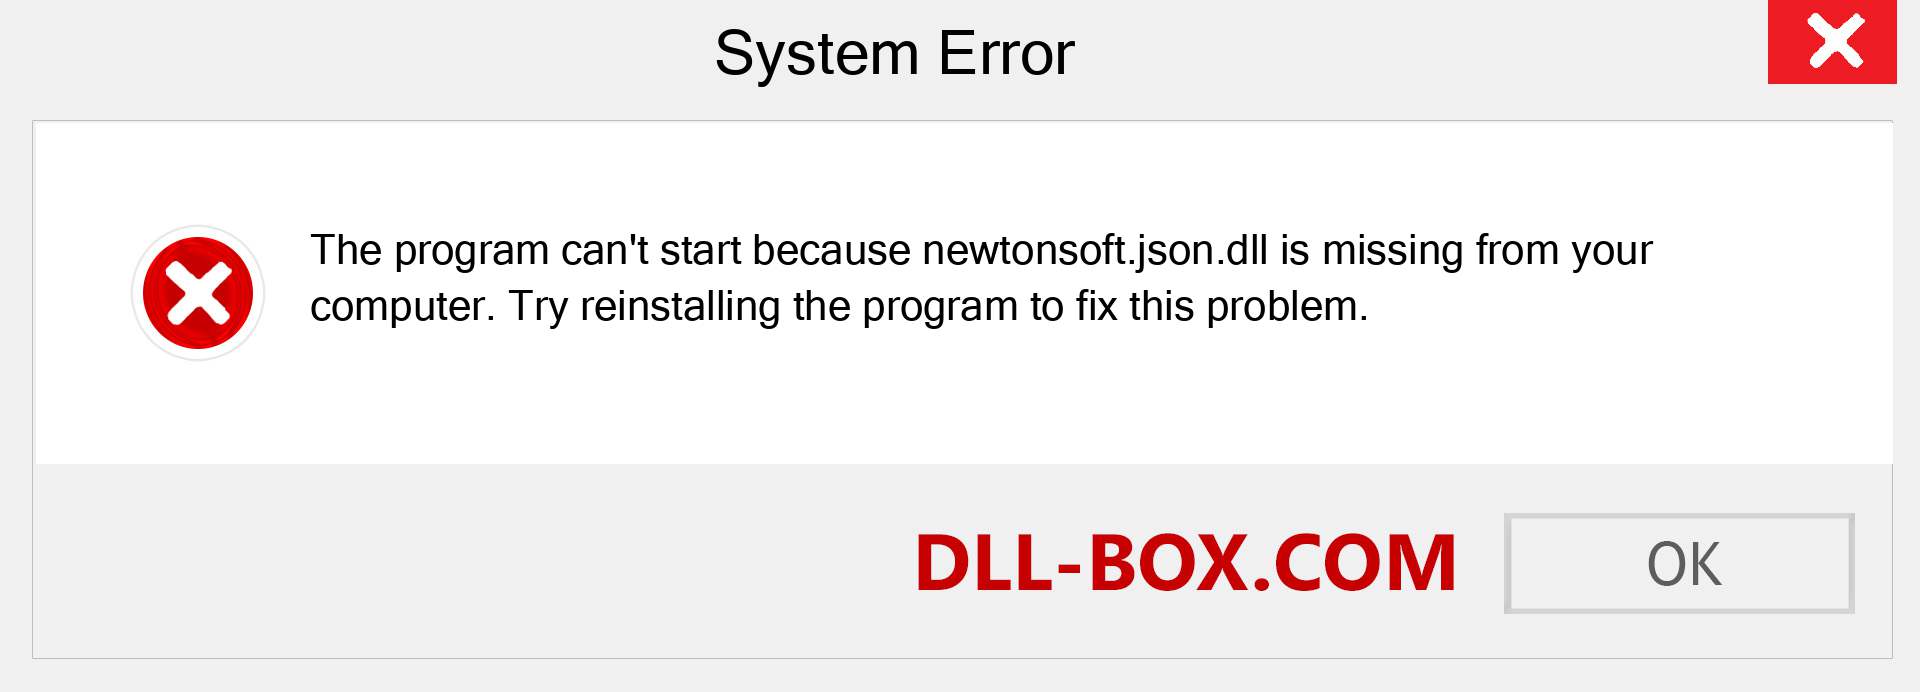  newtonsoft.json.dll file is missing?. Download for Windows 7, 8, 10 - Fix  newtonsoft.json dll Missing Error on Windows, photos, images